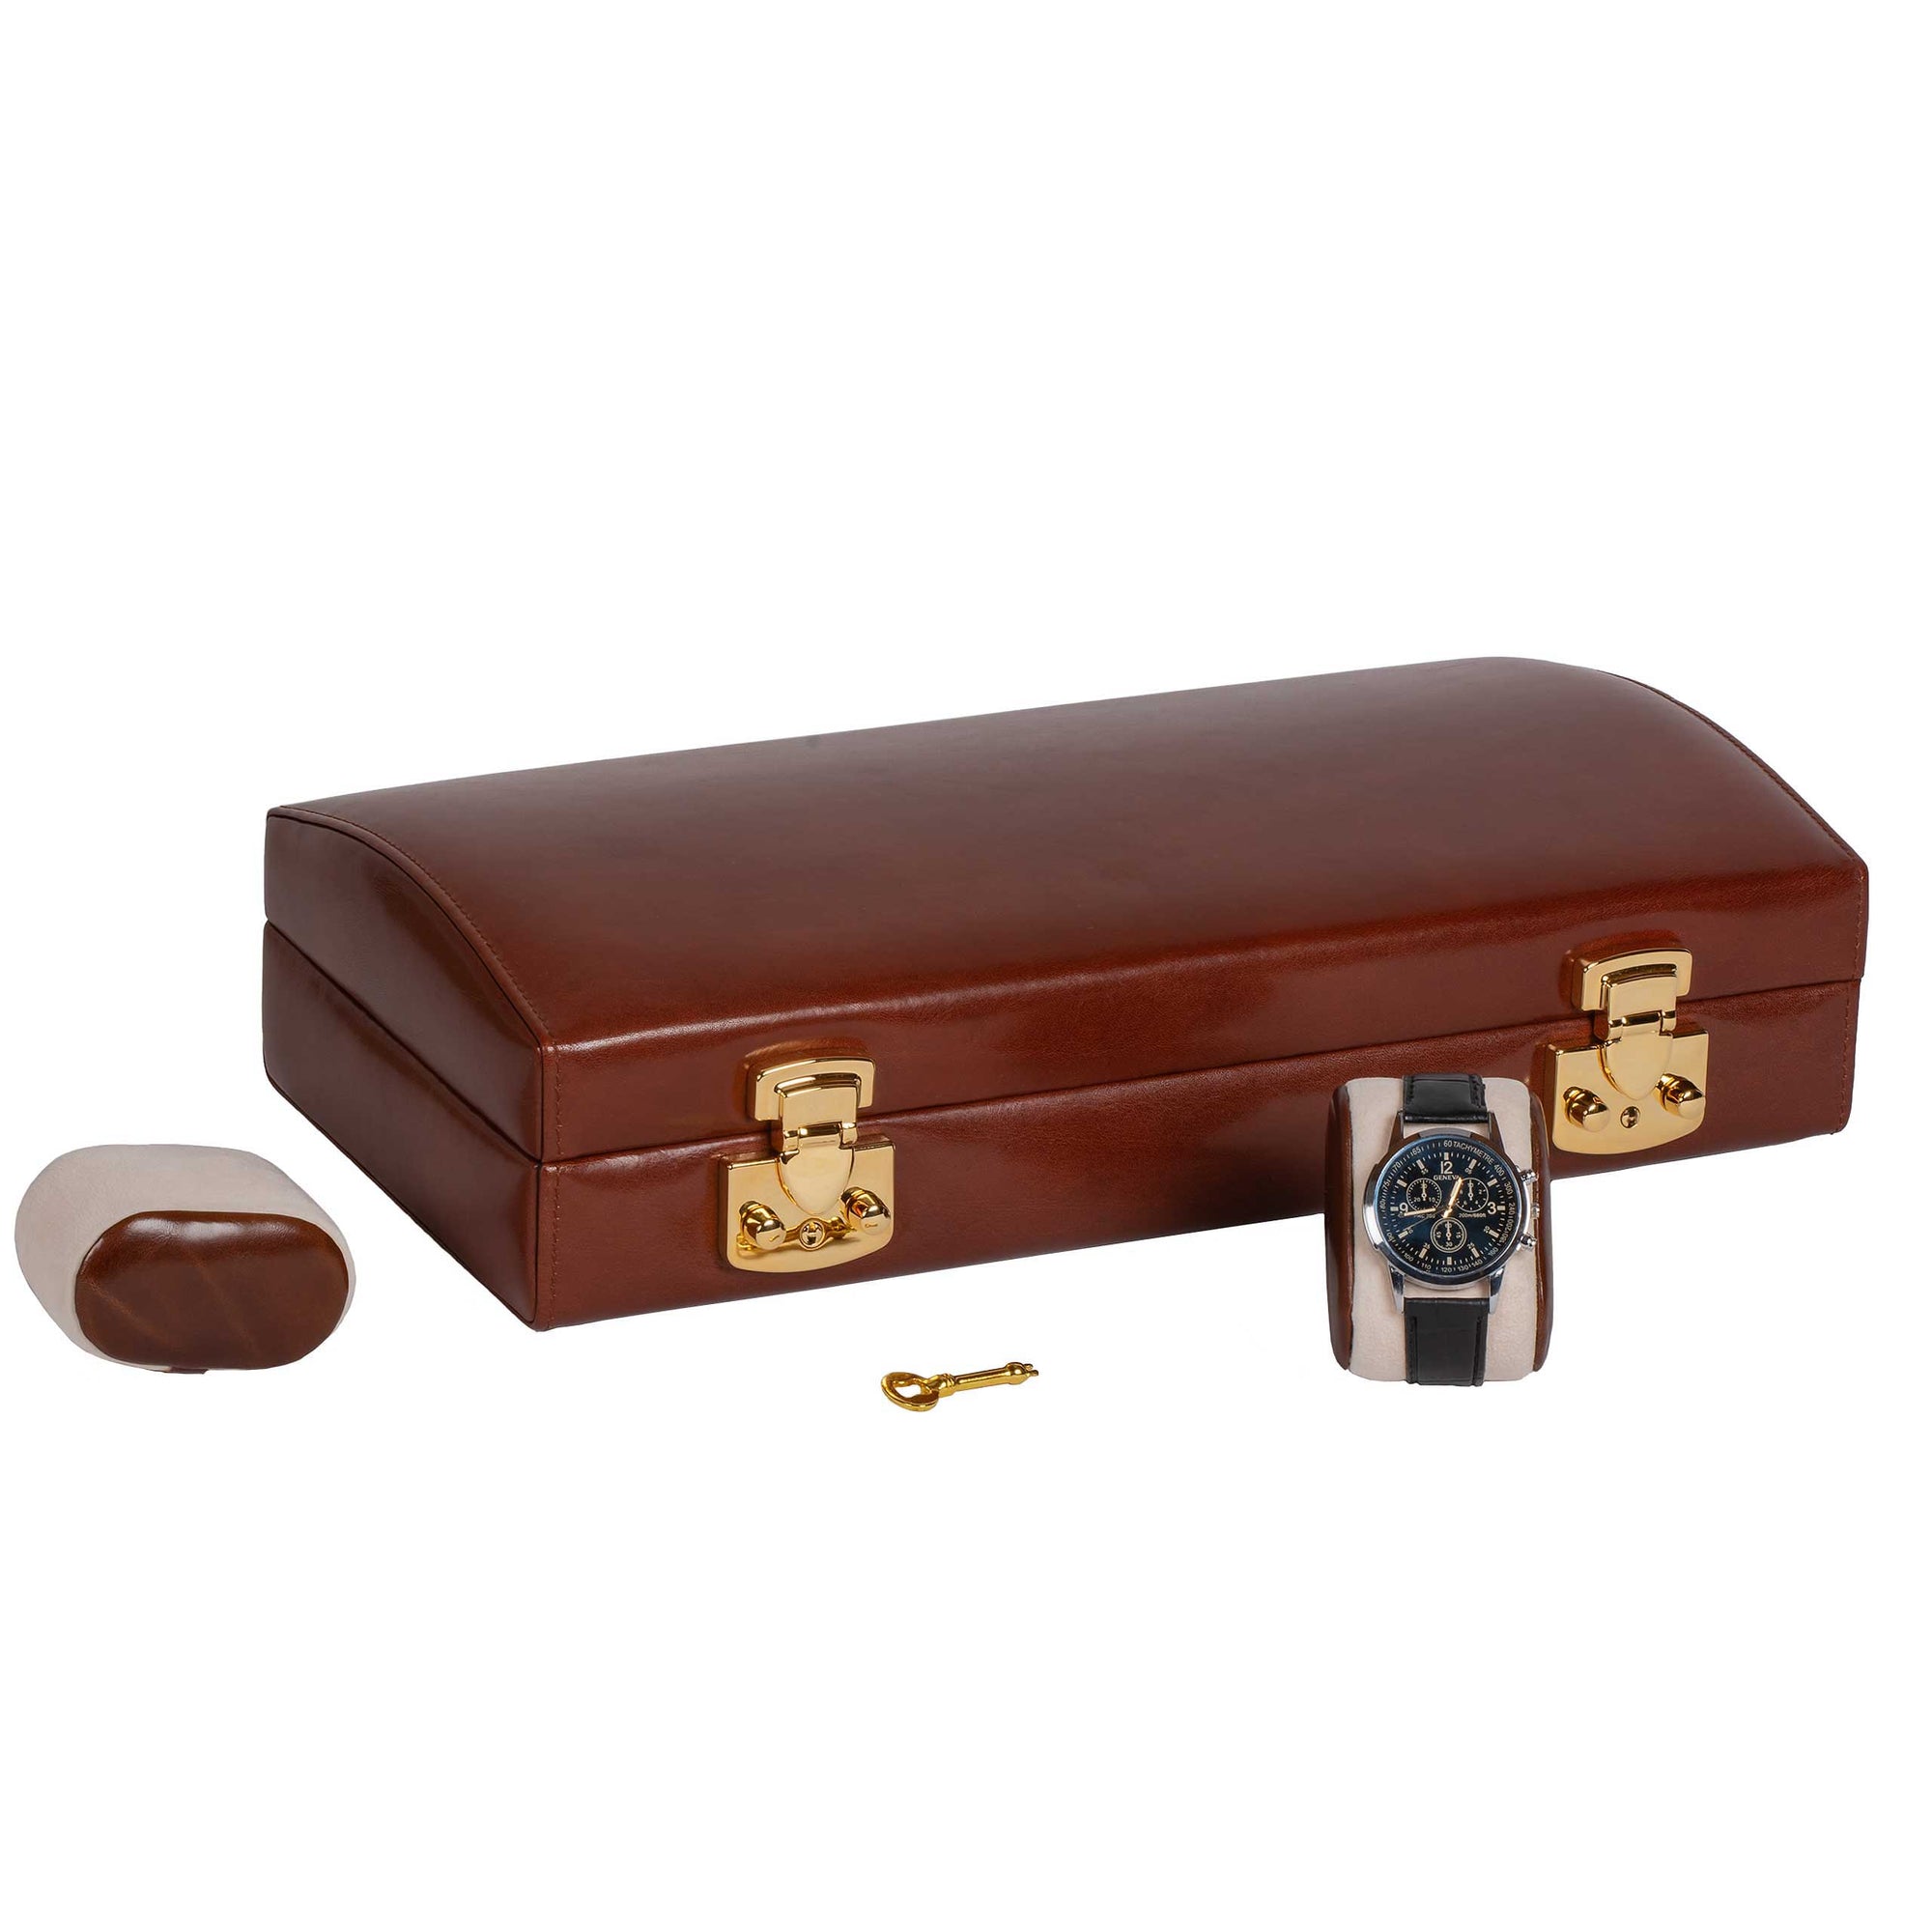 Italian Leather Watch Case Holds Twelve Men's Watches Coffee Brown - Closed View with Watch Pillows (watch not included)